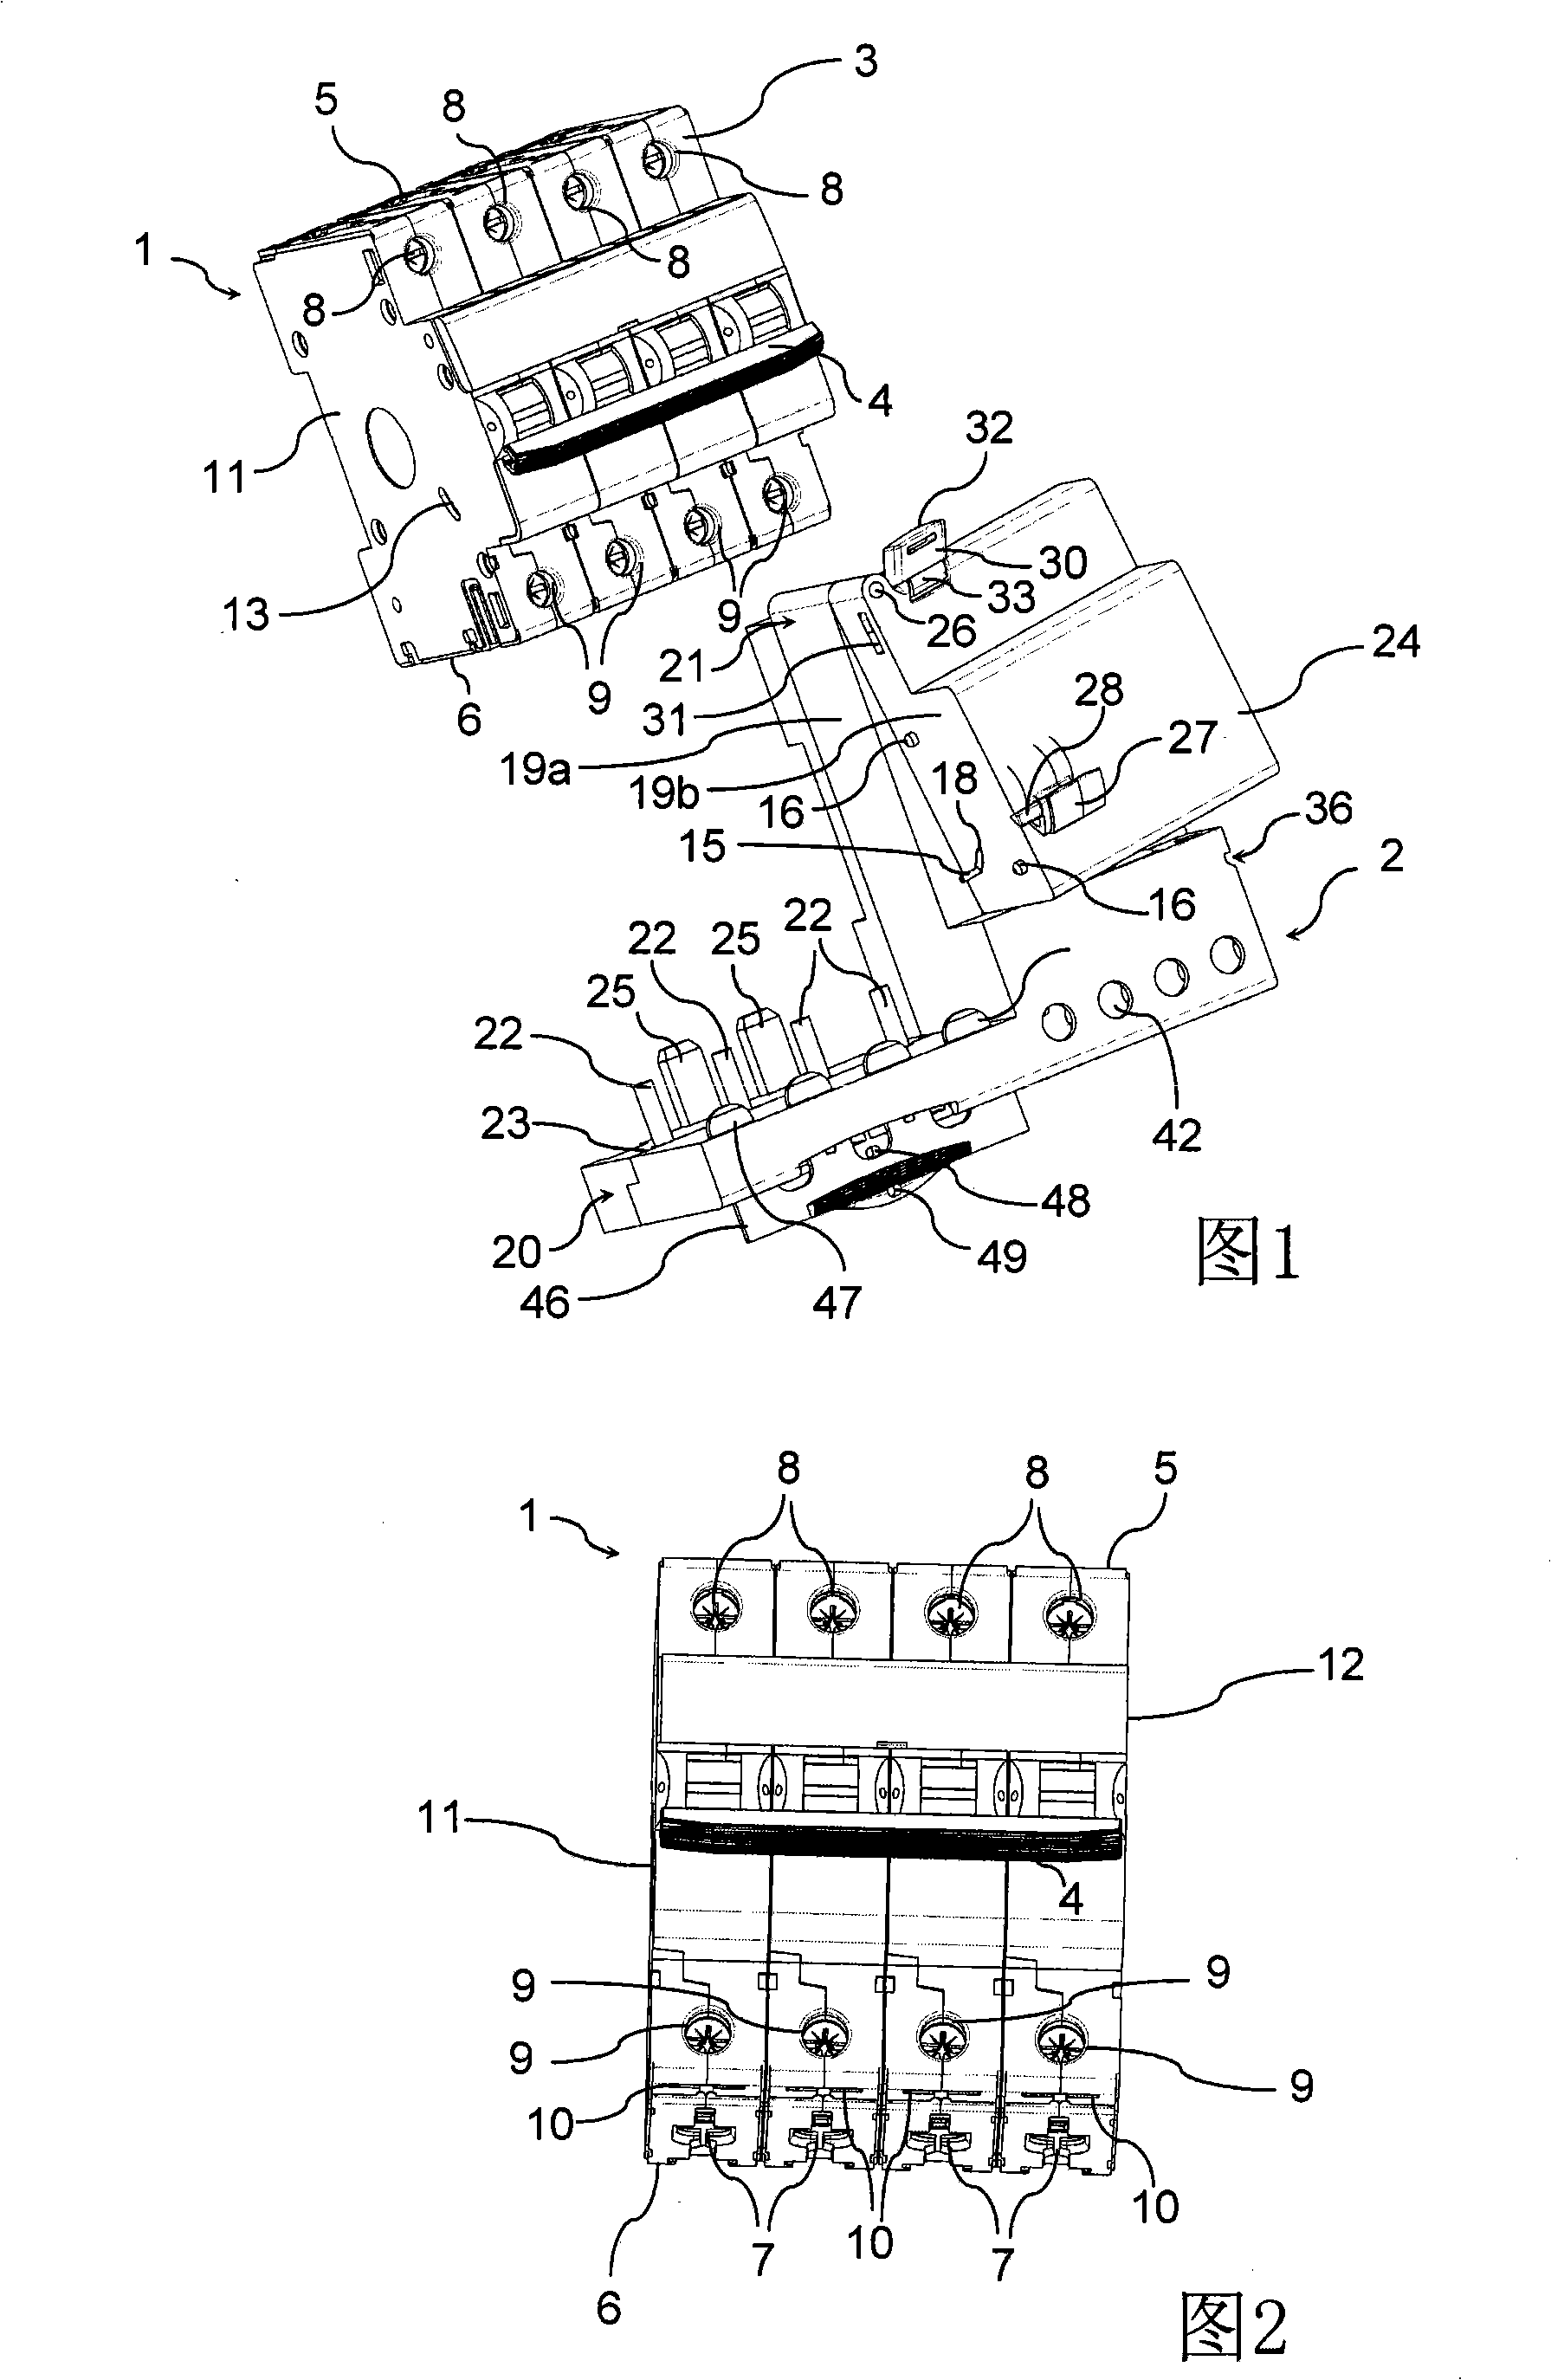 Residual current device for an electric circuit breaker